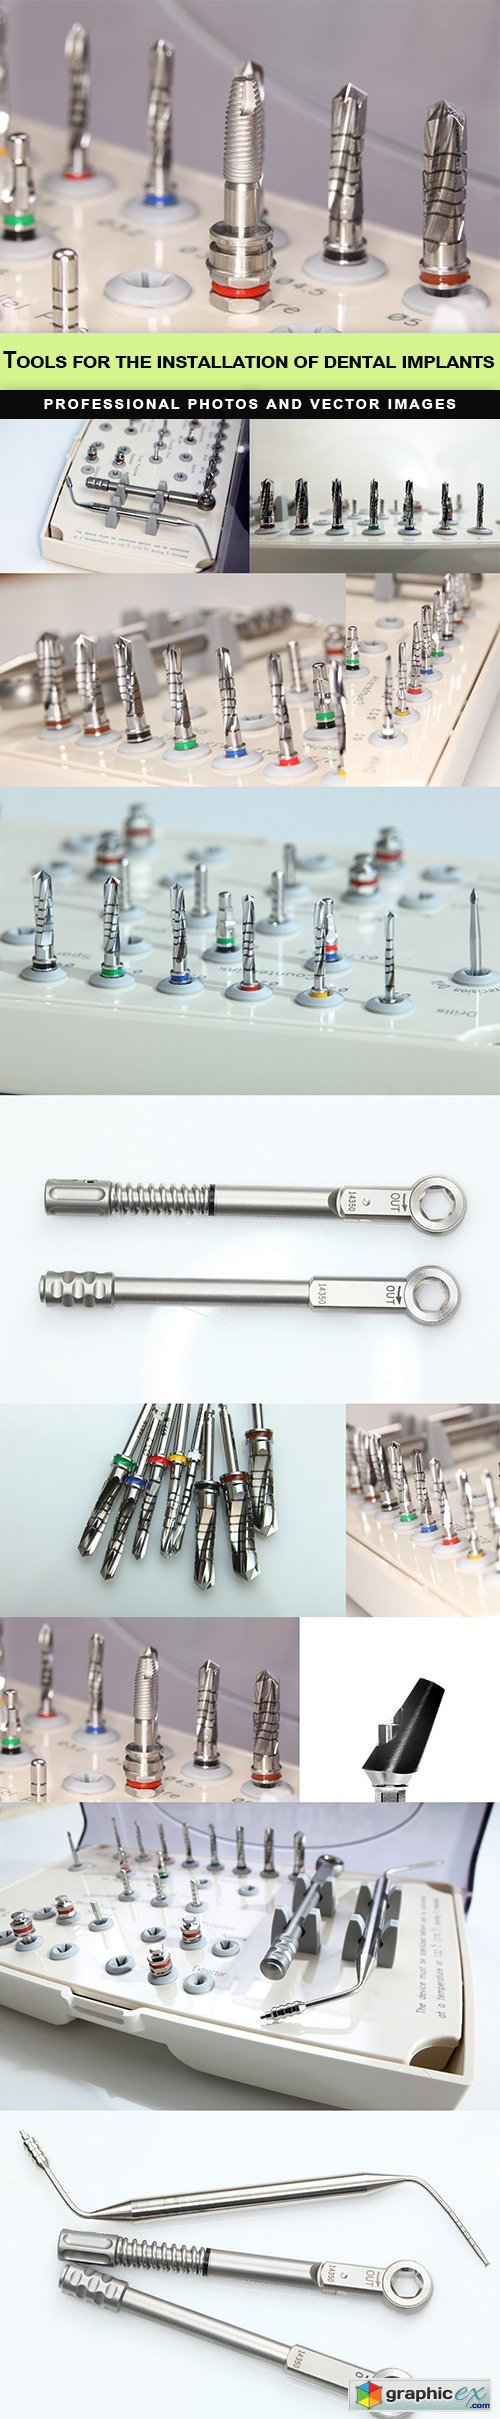 Tools for the installation of dental implants - 12 UHQ JPEG